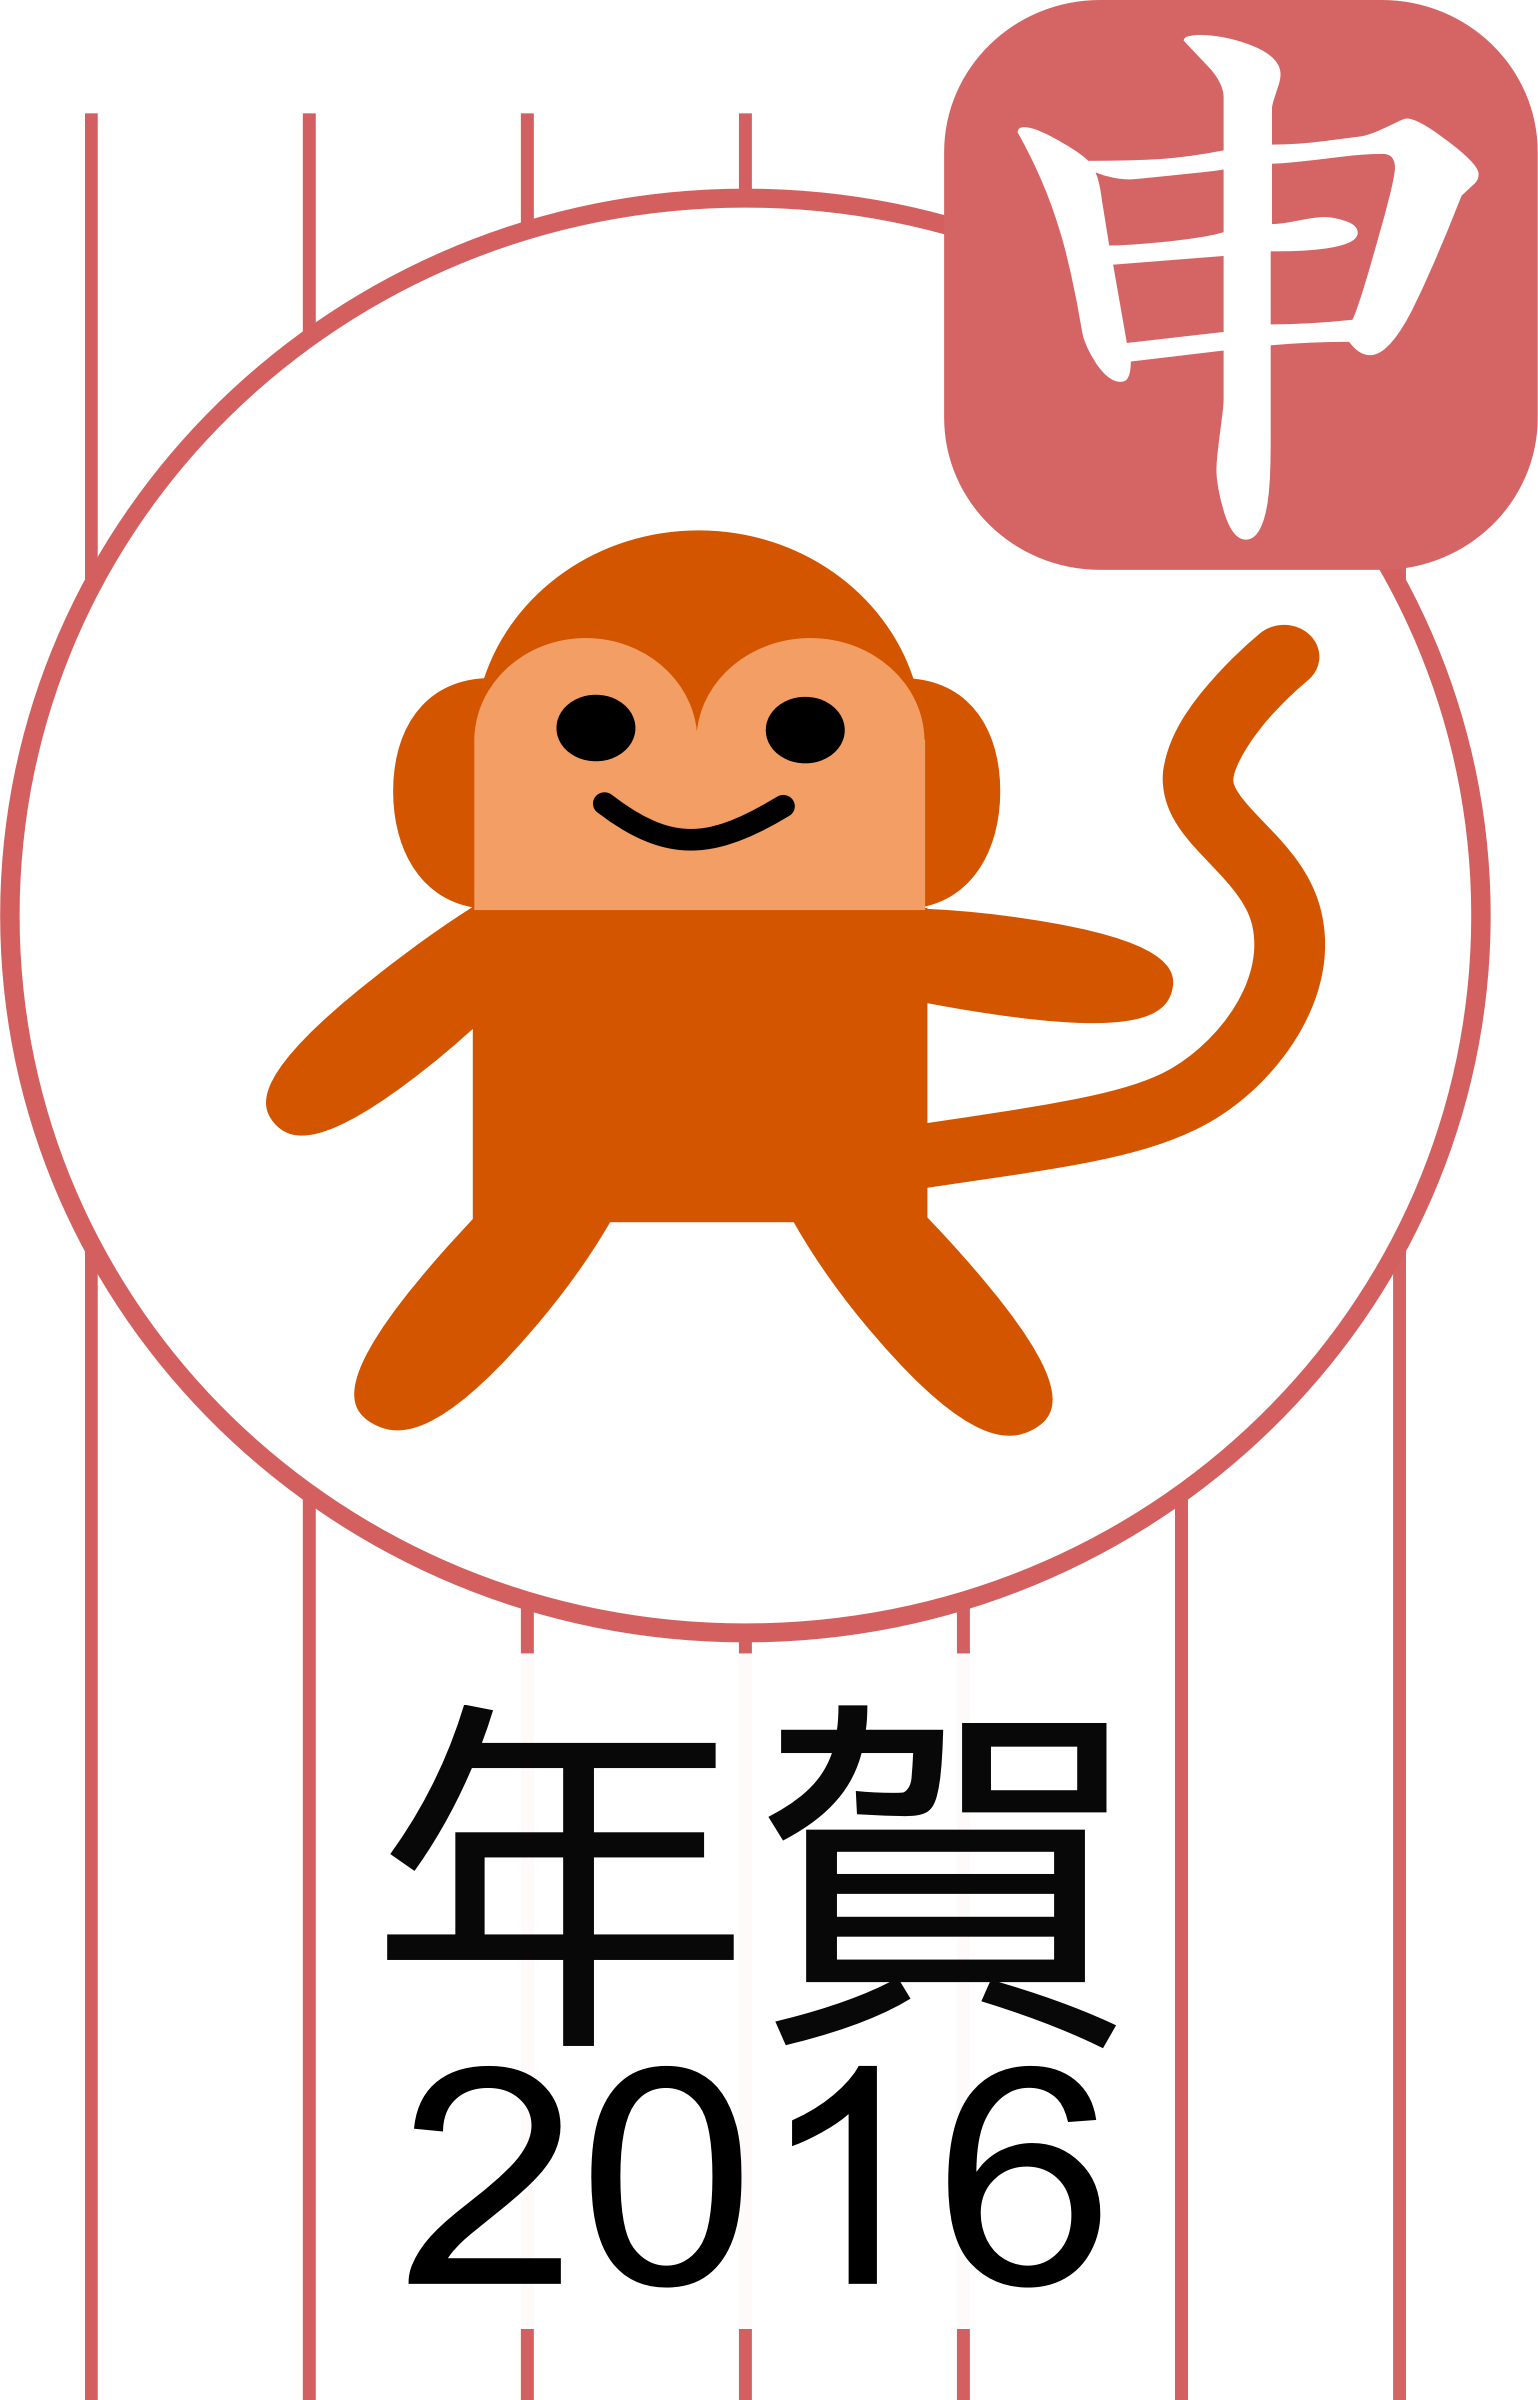 monkeys clipart chinese new year